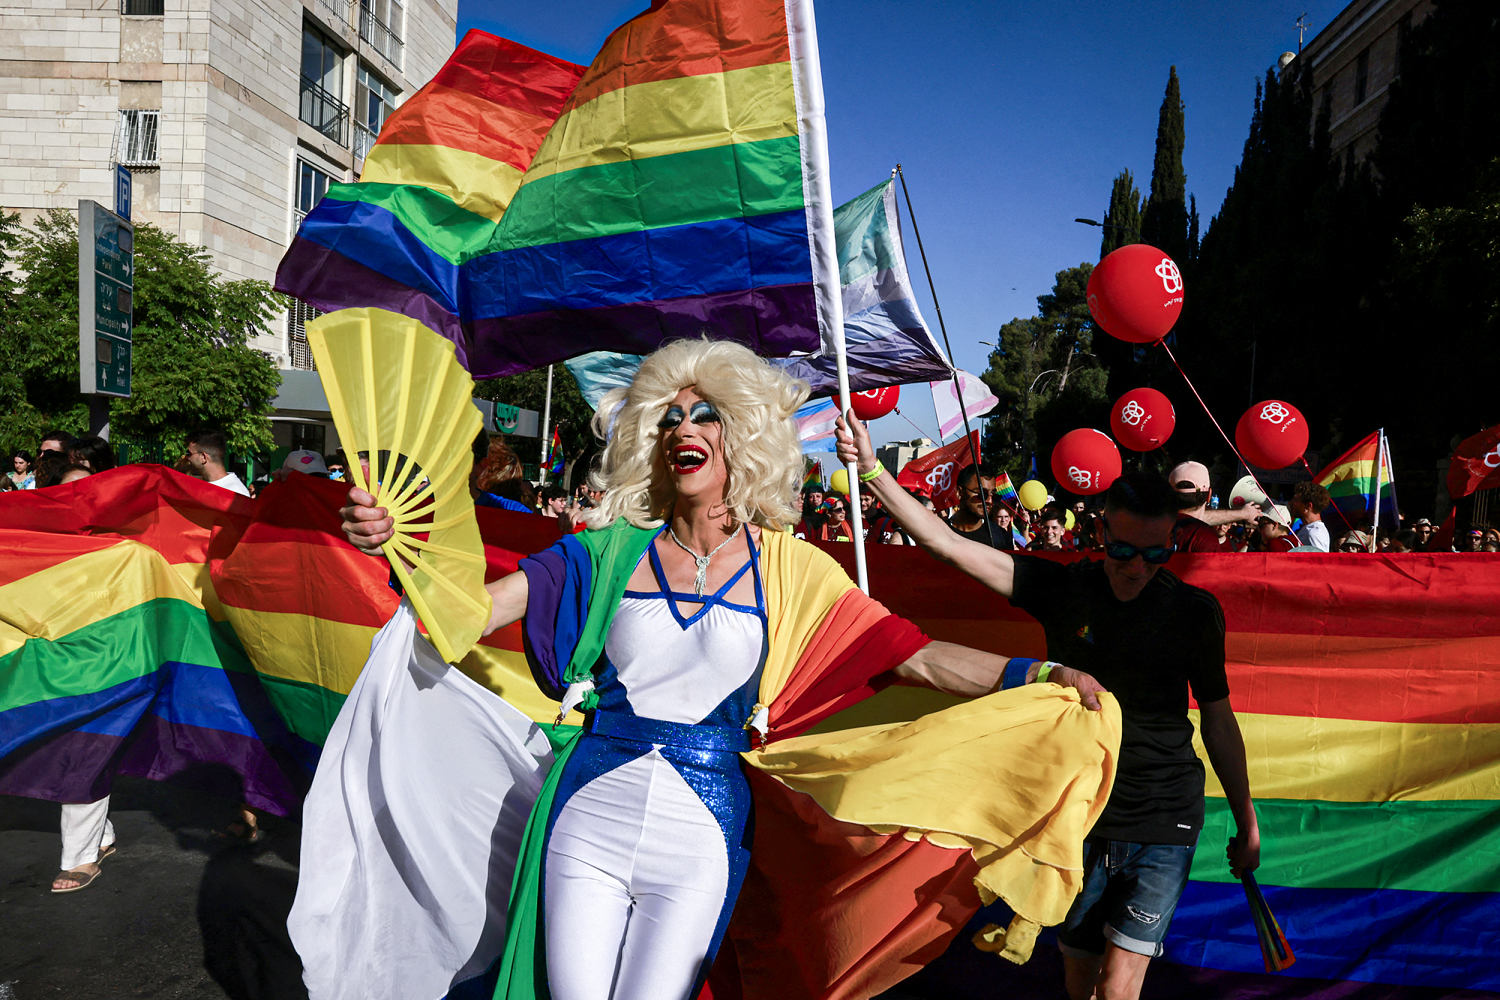 Thousands march in a subdued Jerusalem gay pride parade